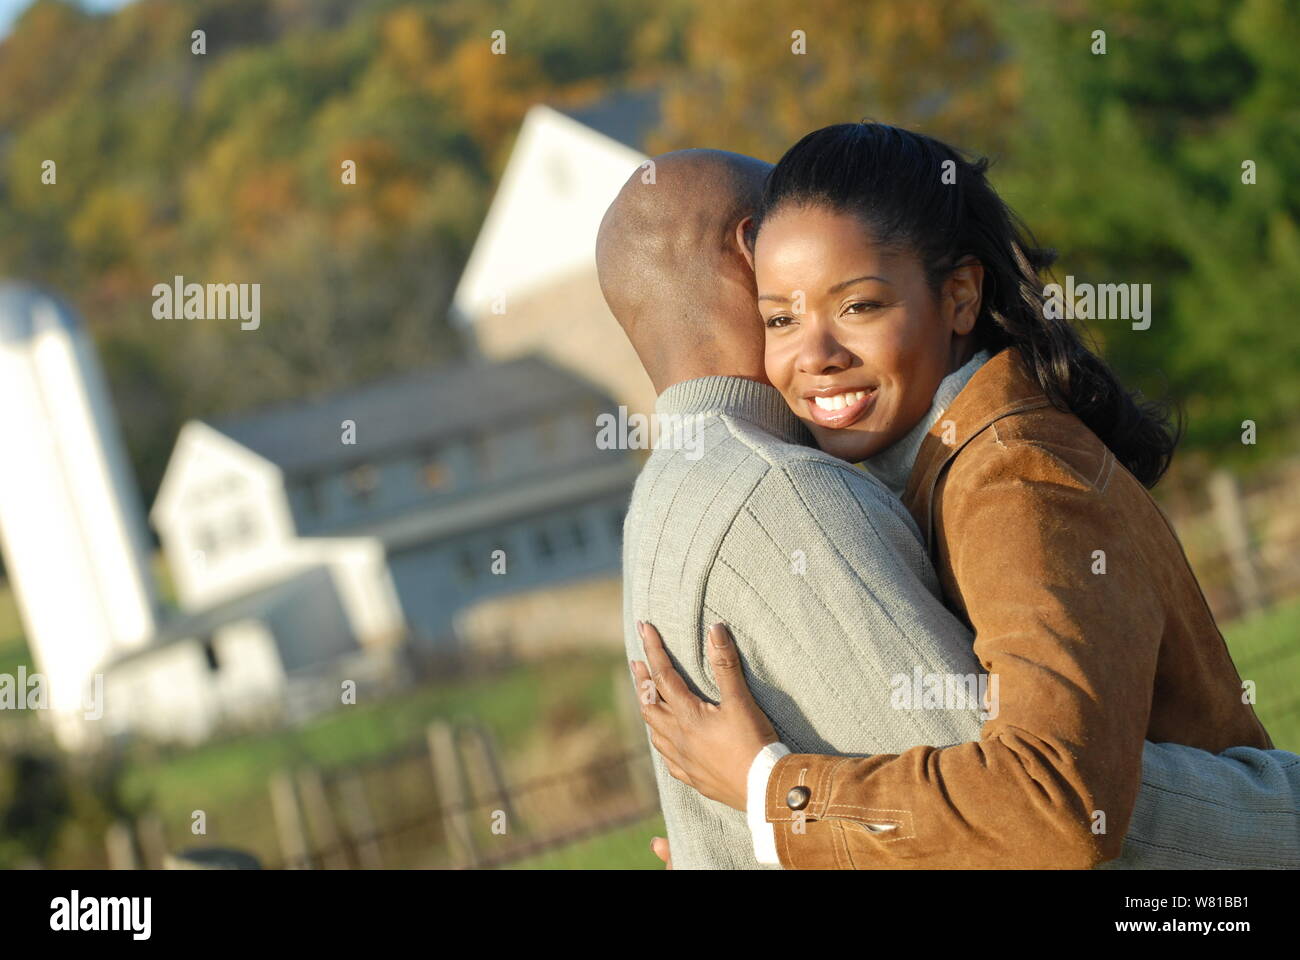 Couple in sweaters during autumn Stock Photo